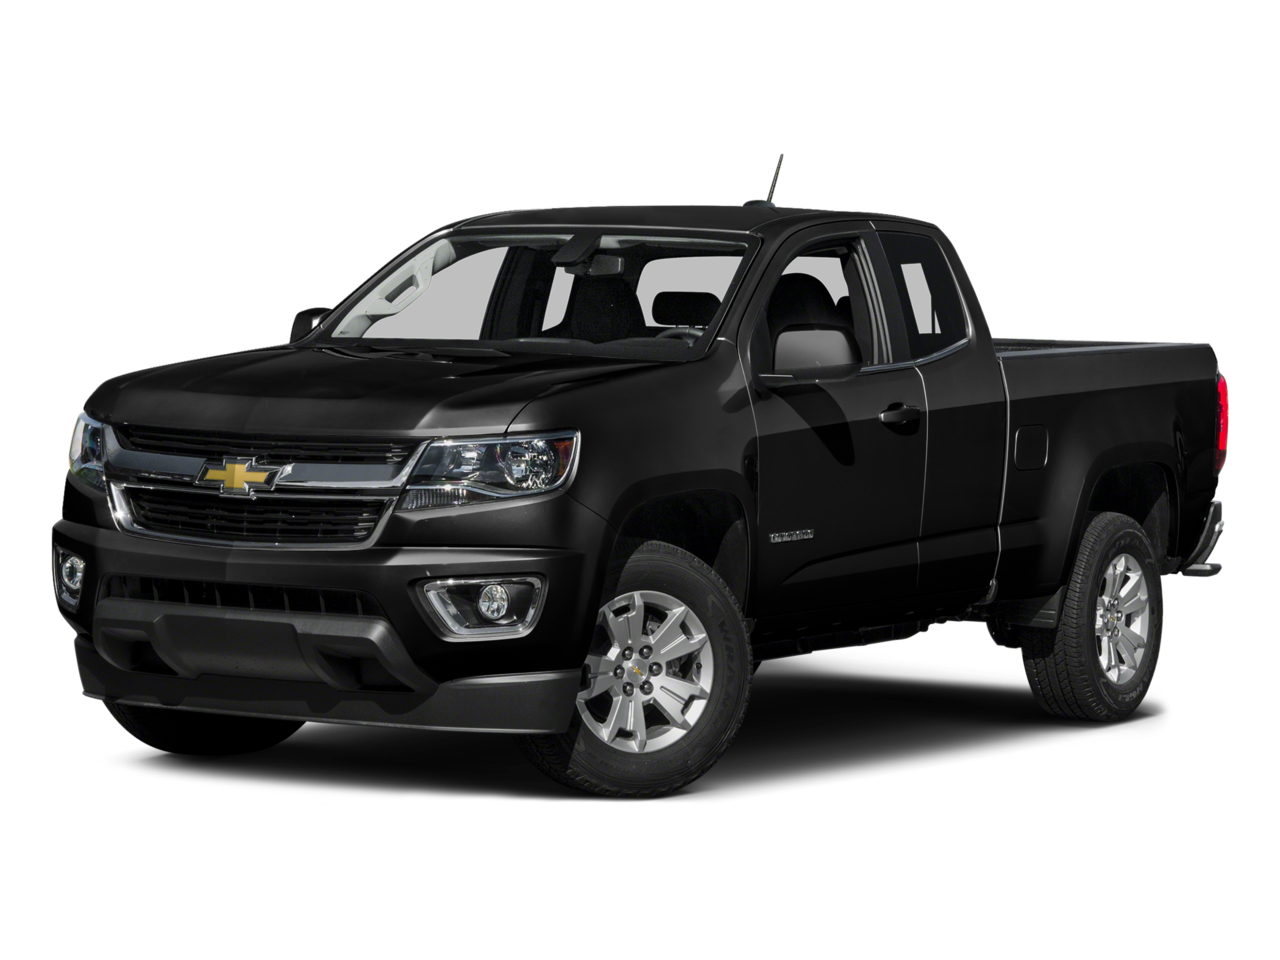 Chevy Colorado Windshield Replacement Cost: What to Expect